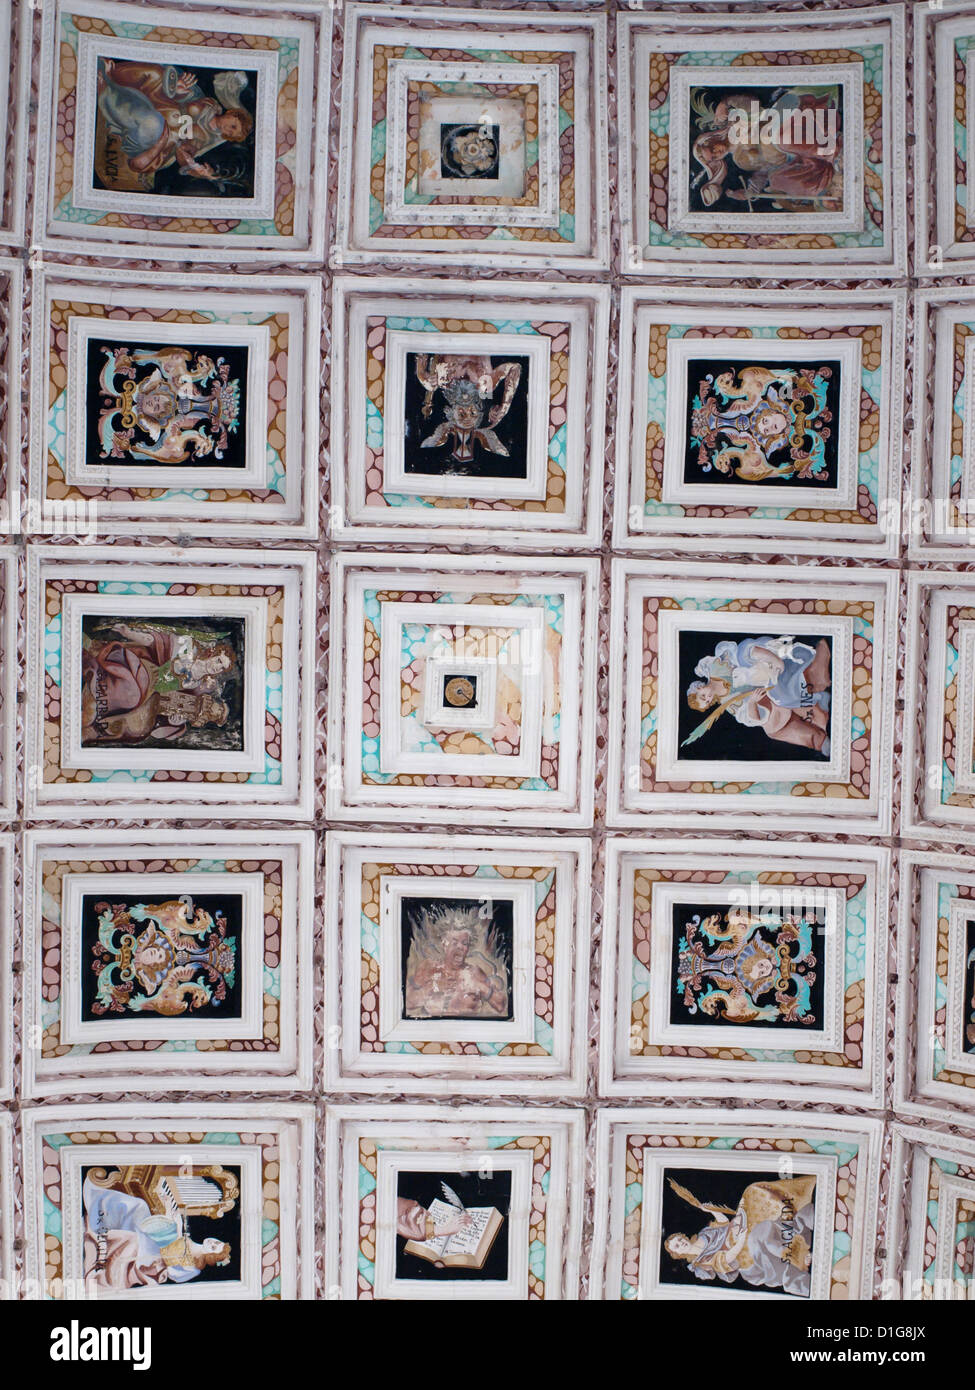 The Hospital de Santiago ceiling, a building in Ubeda,Andalusia Spain a Unesco world heritage site with renaissance palaces and churches, Stock Photo